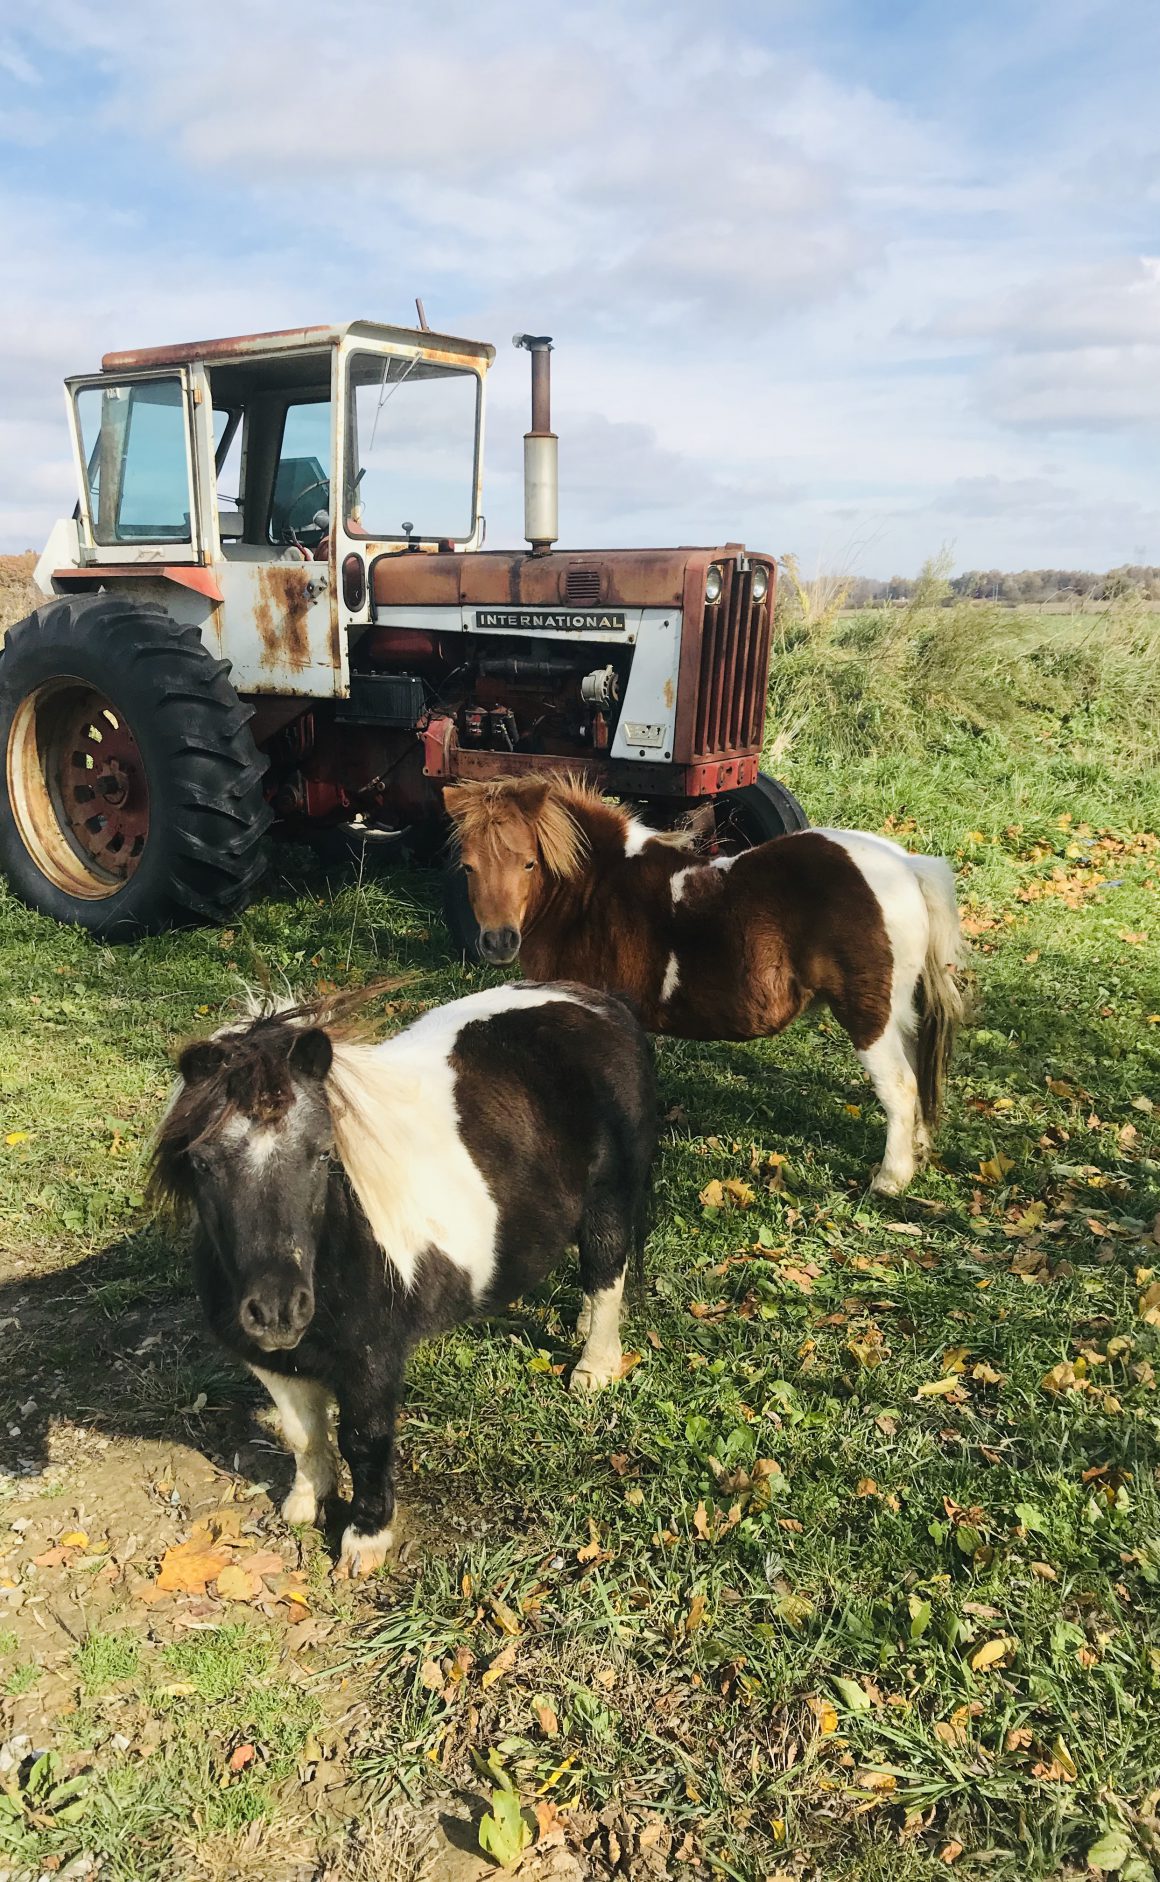 Two ponies grazing by a tractor.